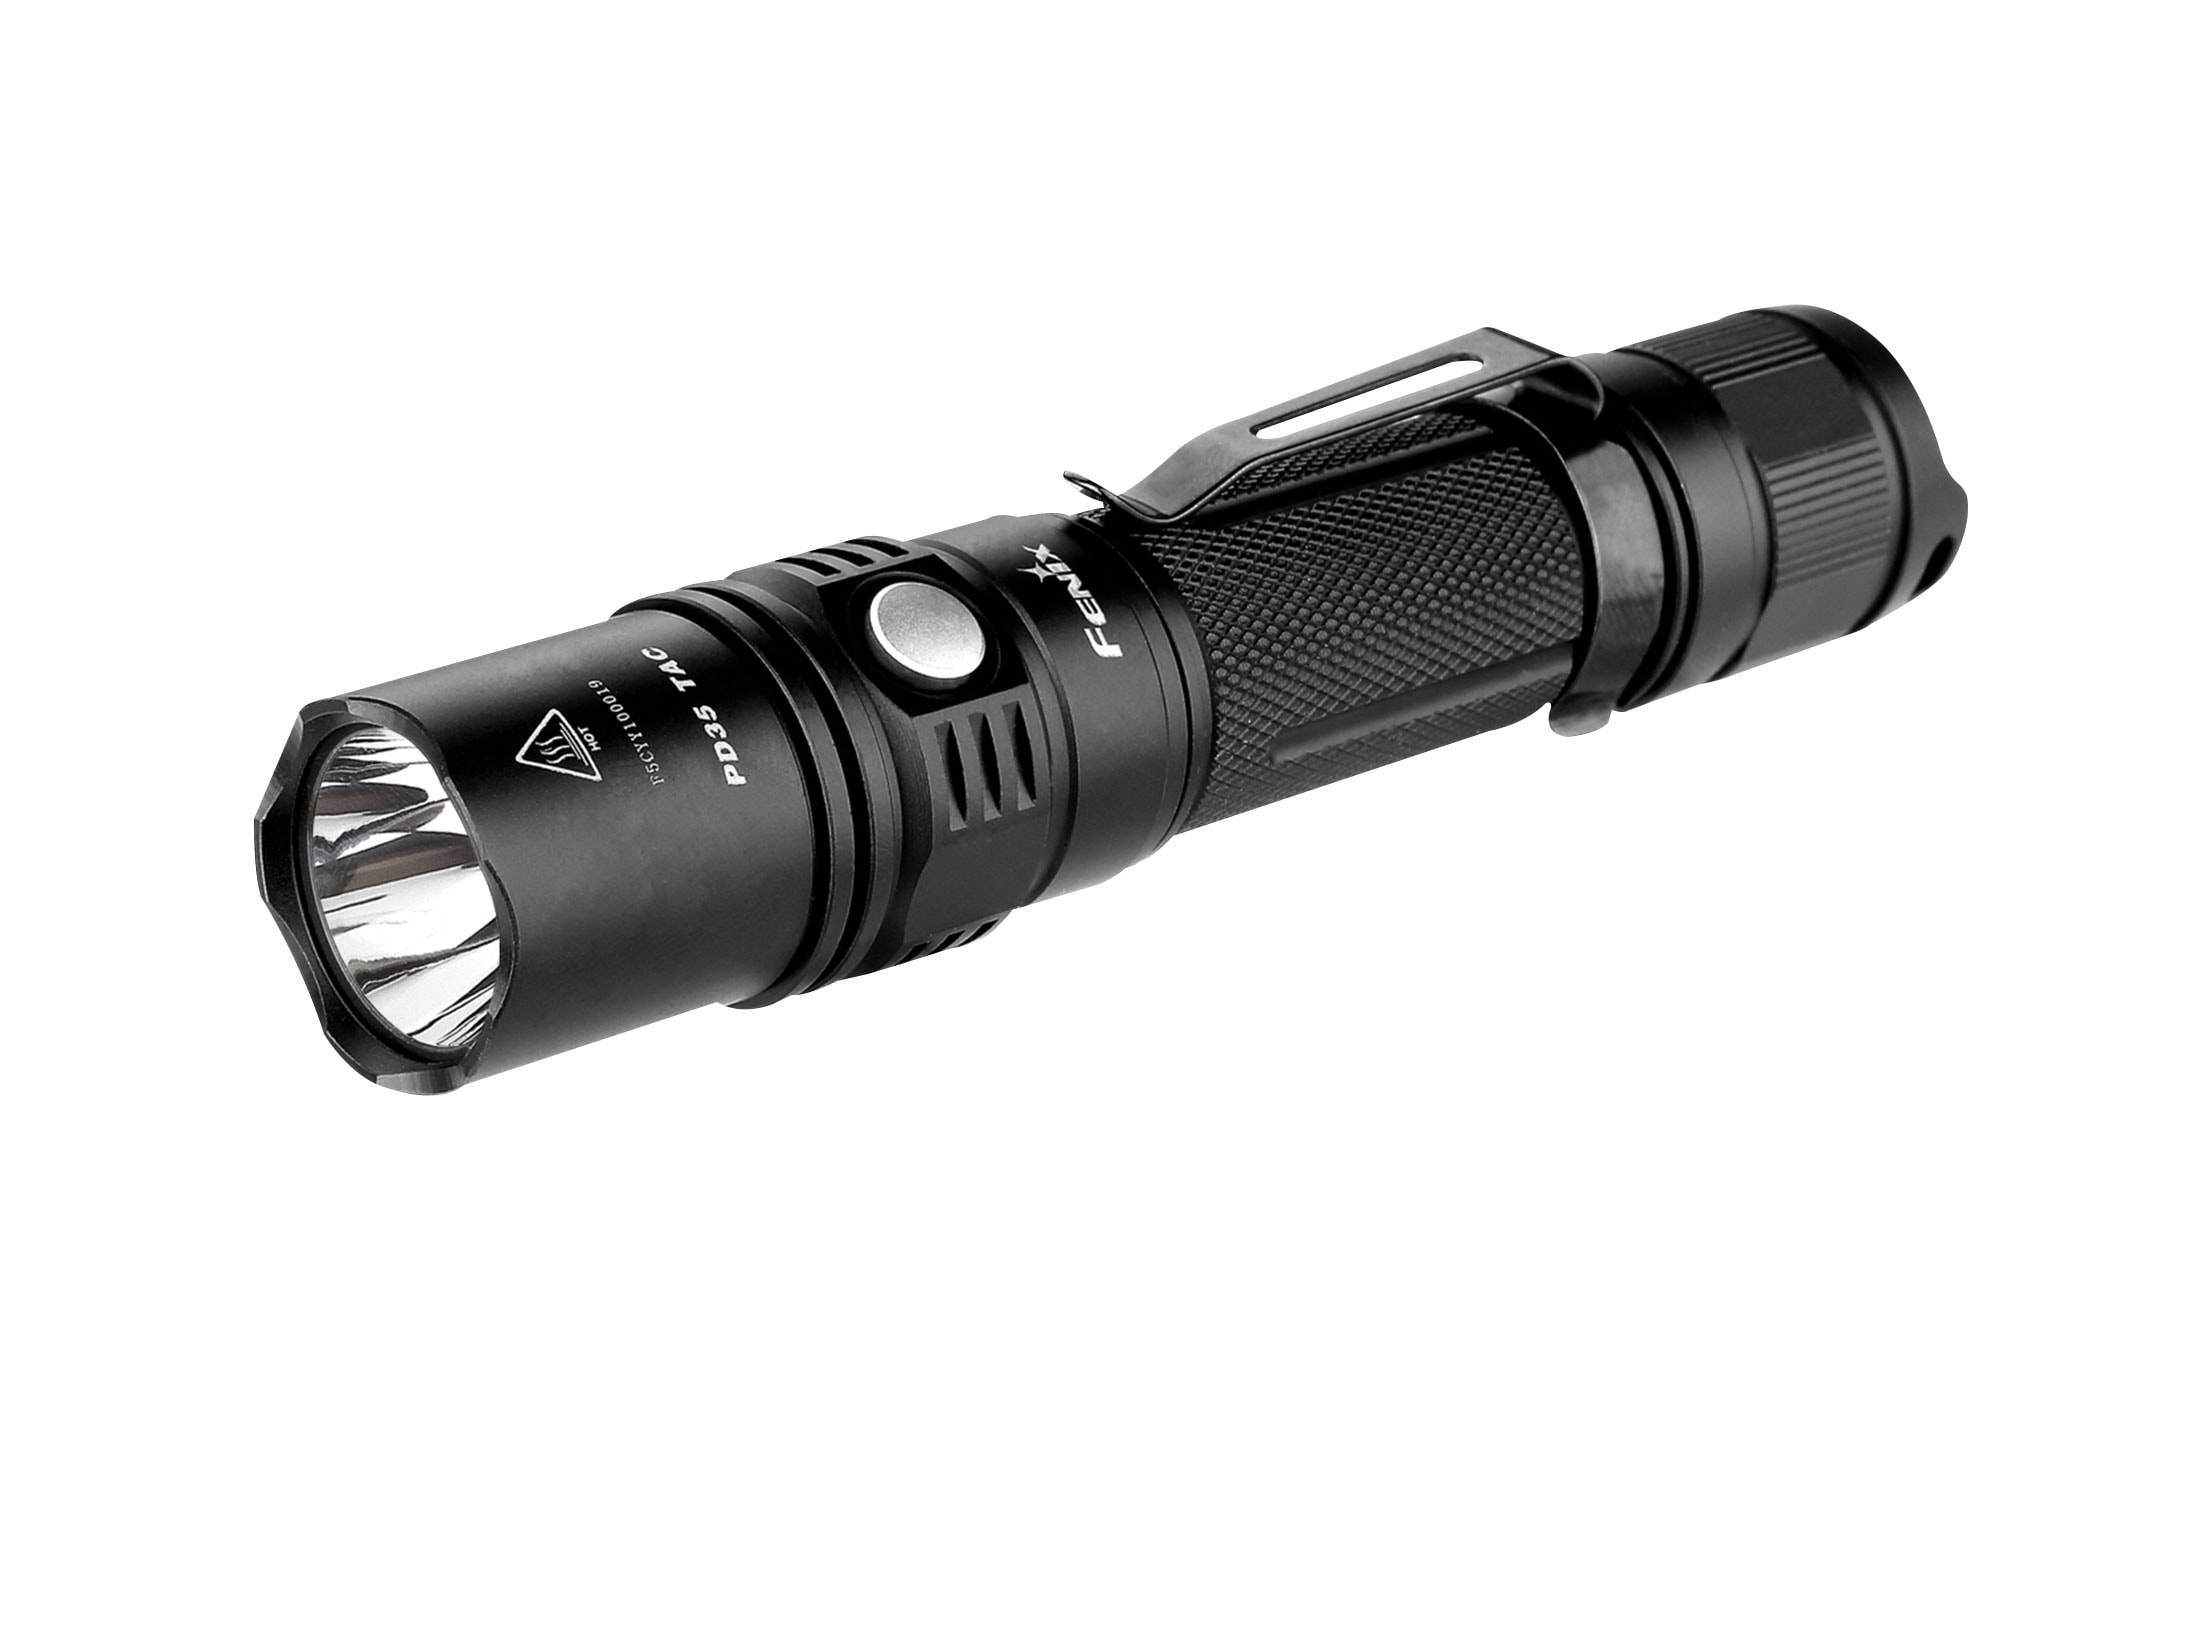 Fenix Pd35 Tac Tactical Edition Flashlight Led Requires 2 Cr123a Or 1